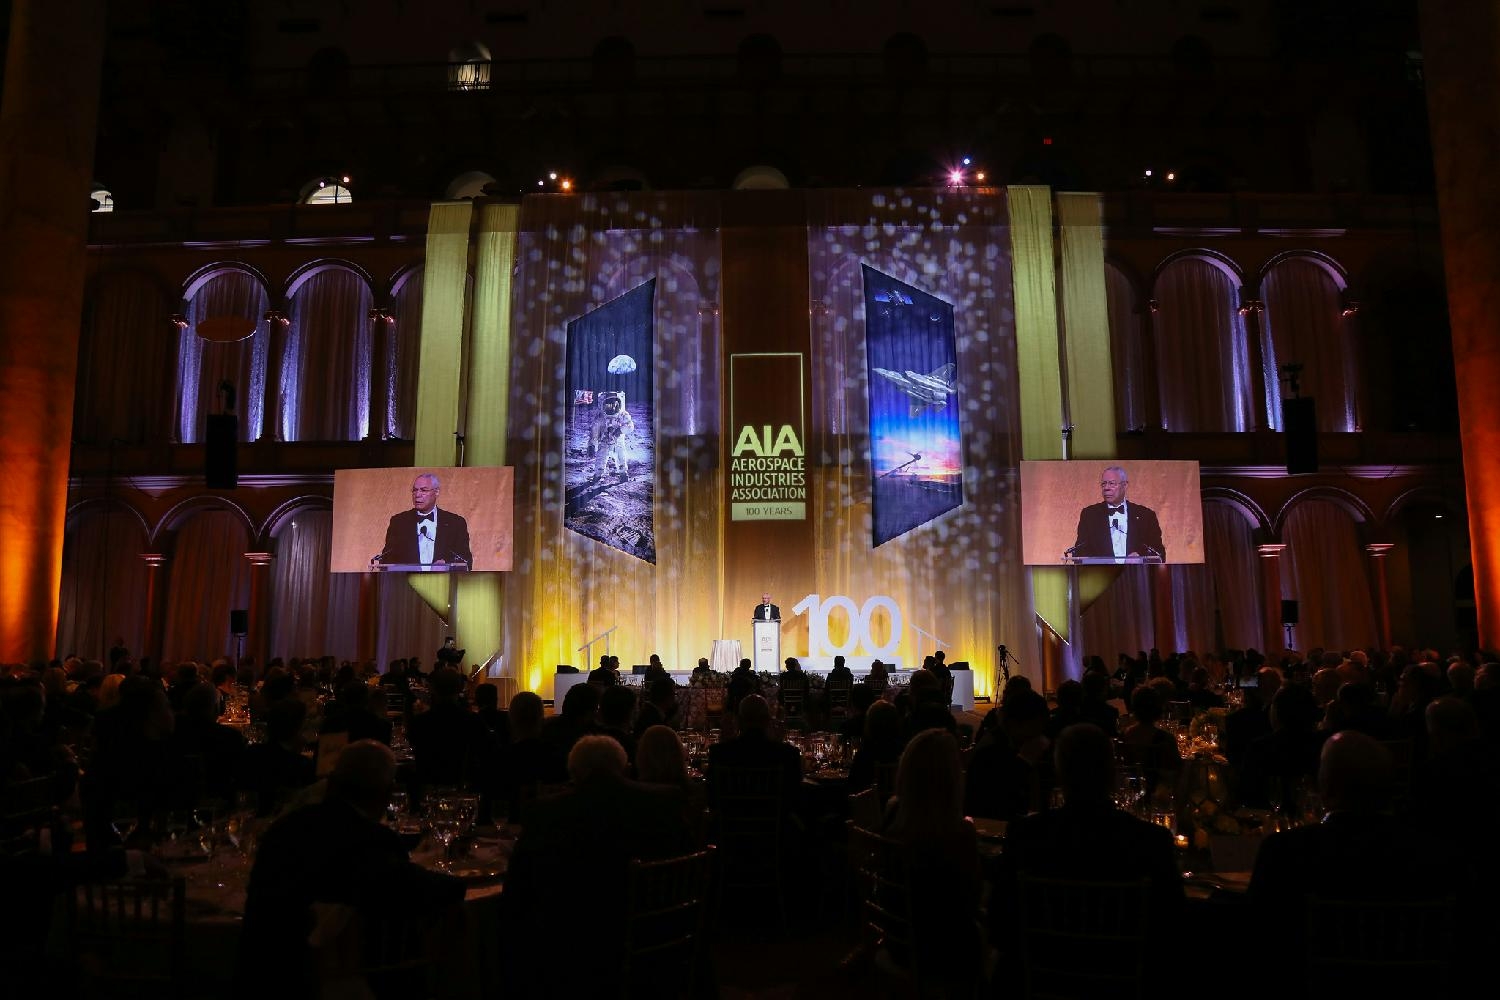 In 2020, AIA celebrated 100 years representing the aerospace and defense industry.